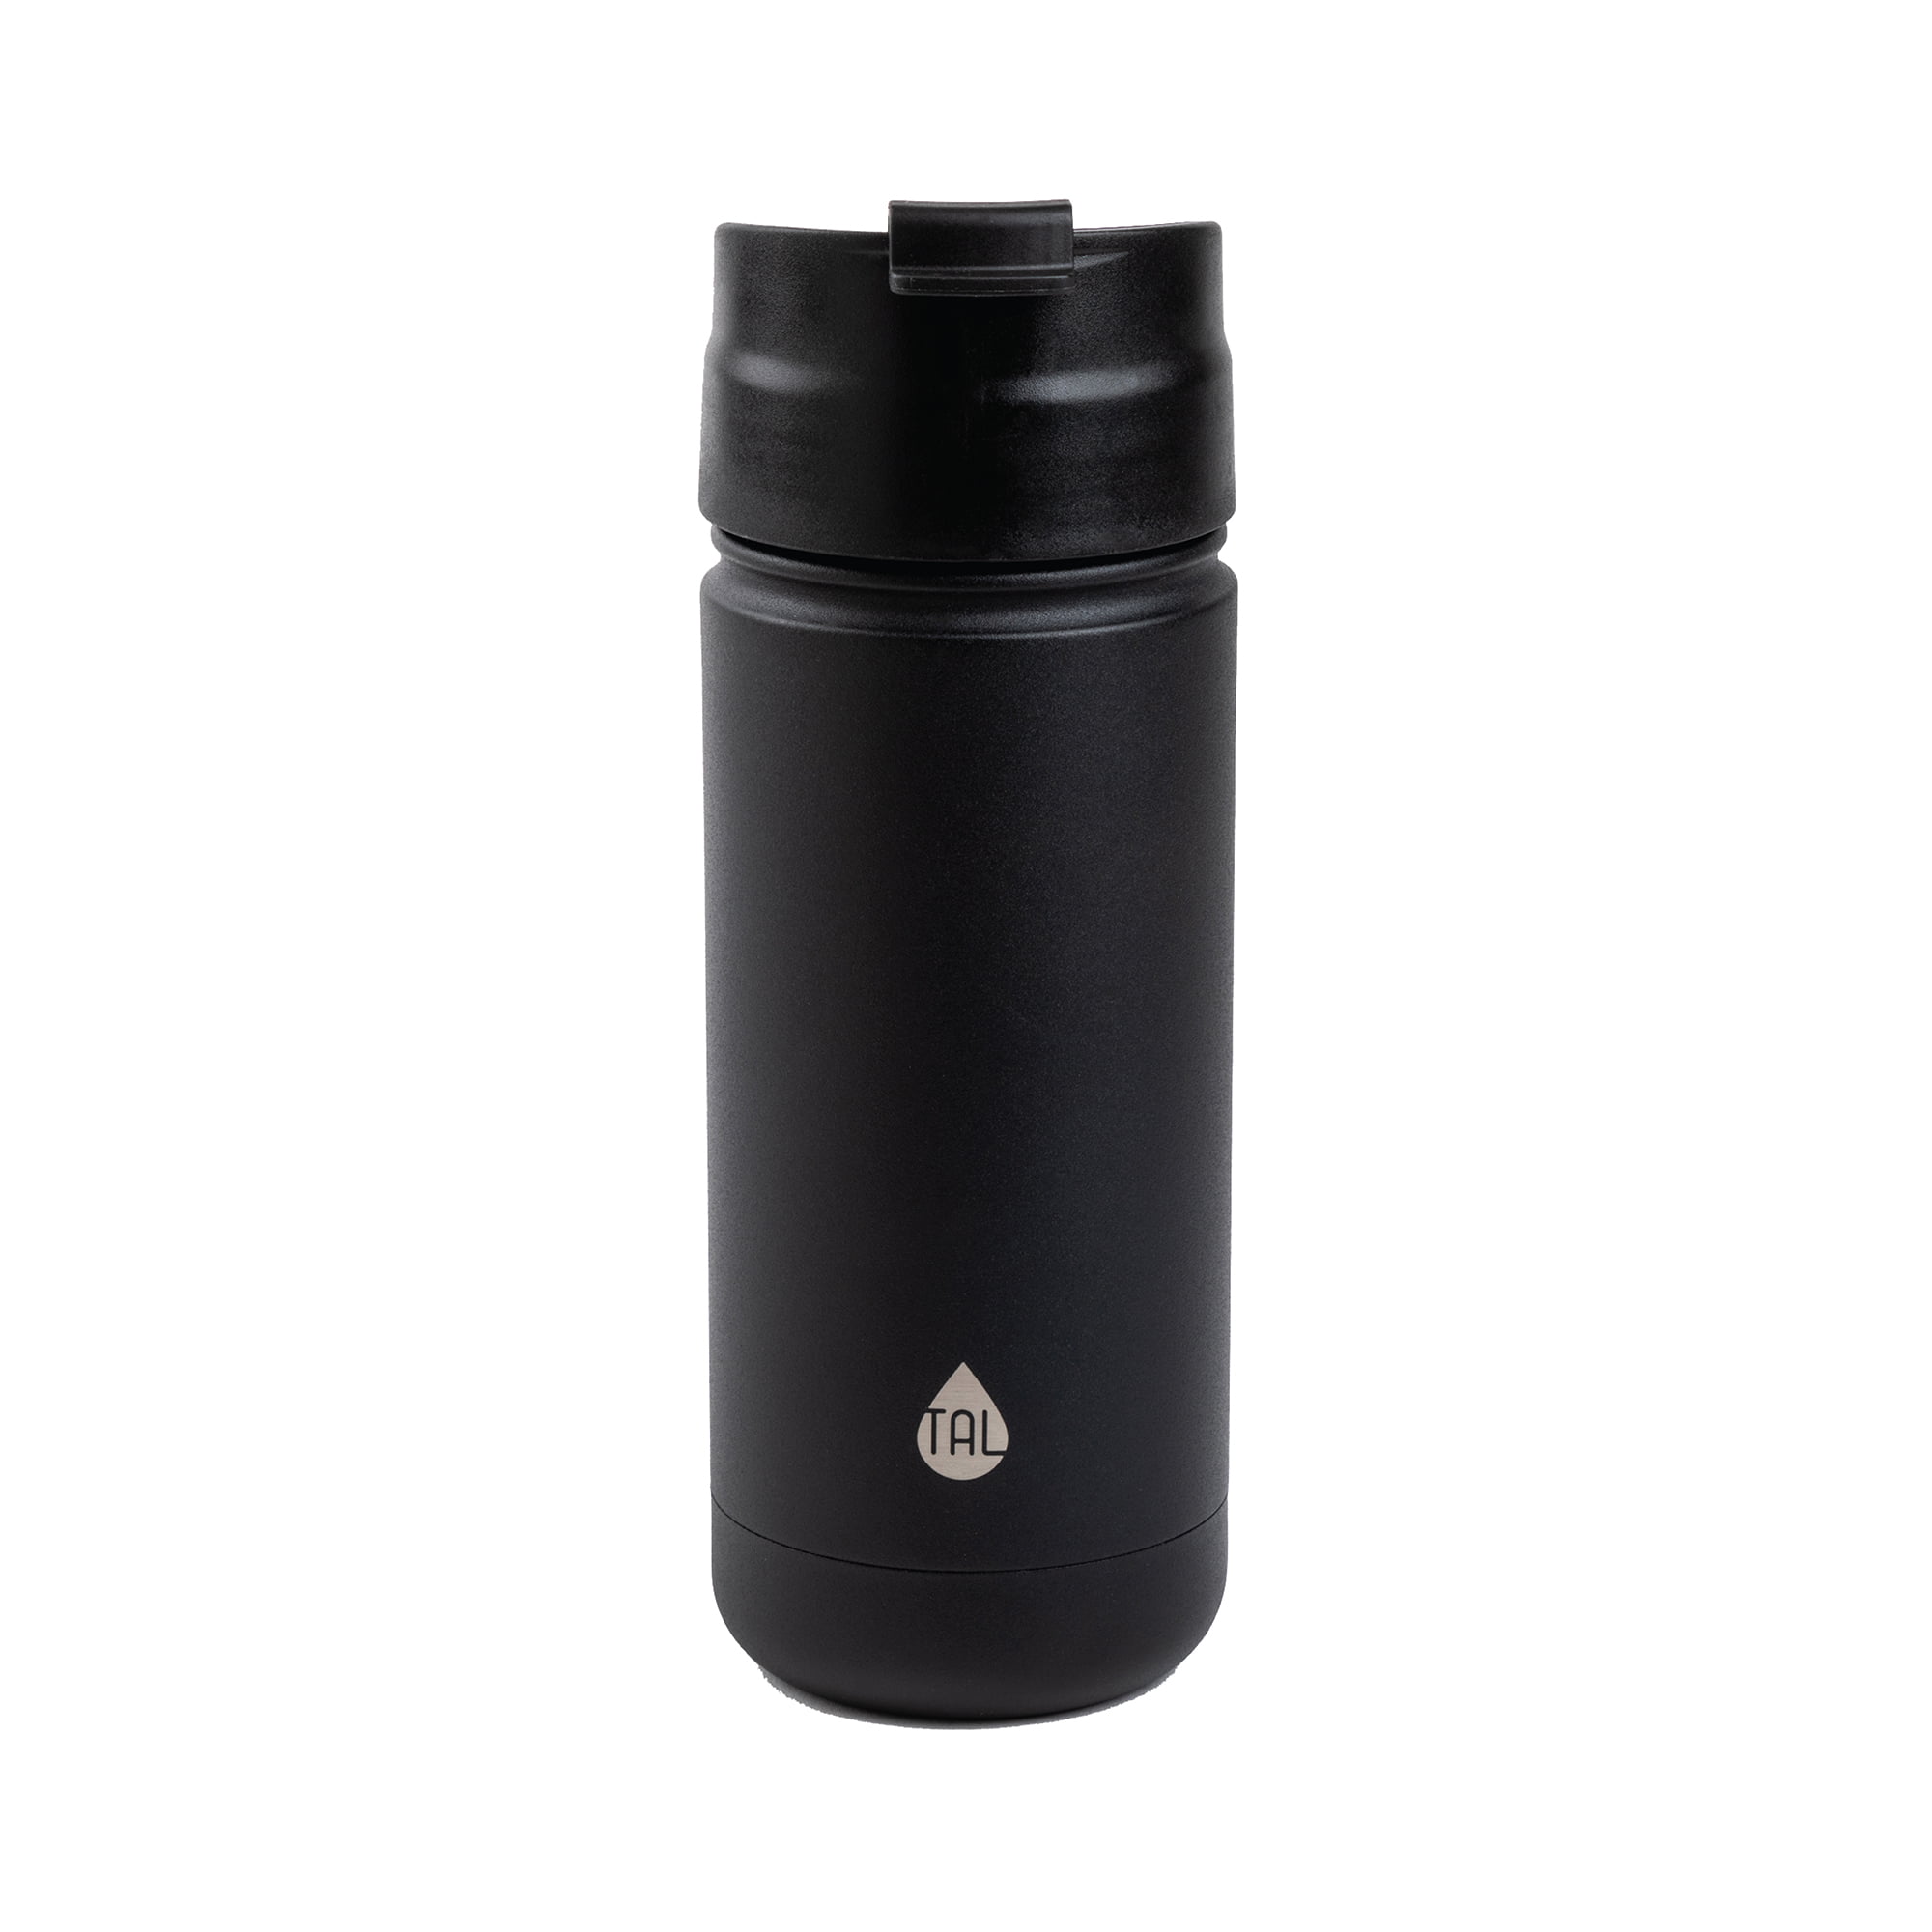 TAL Double Wall Insulated Stainless Steel Ranger Coffee